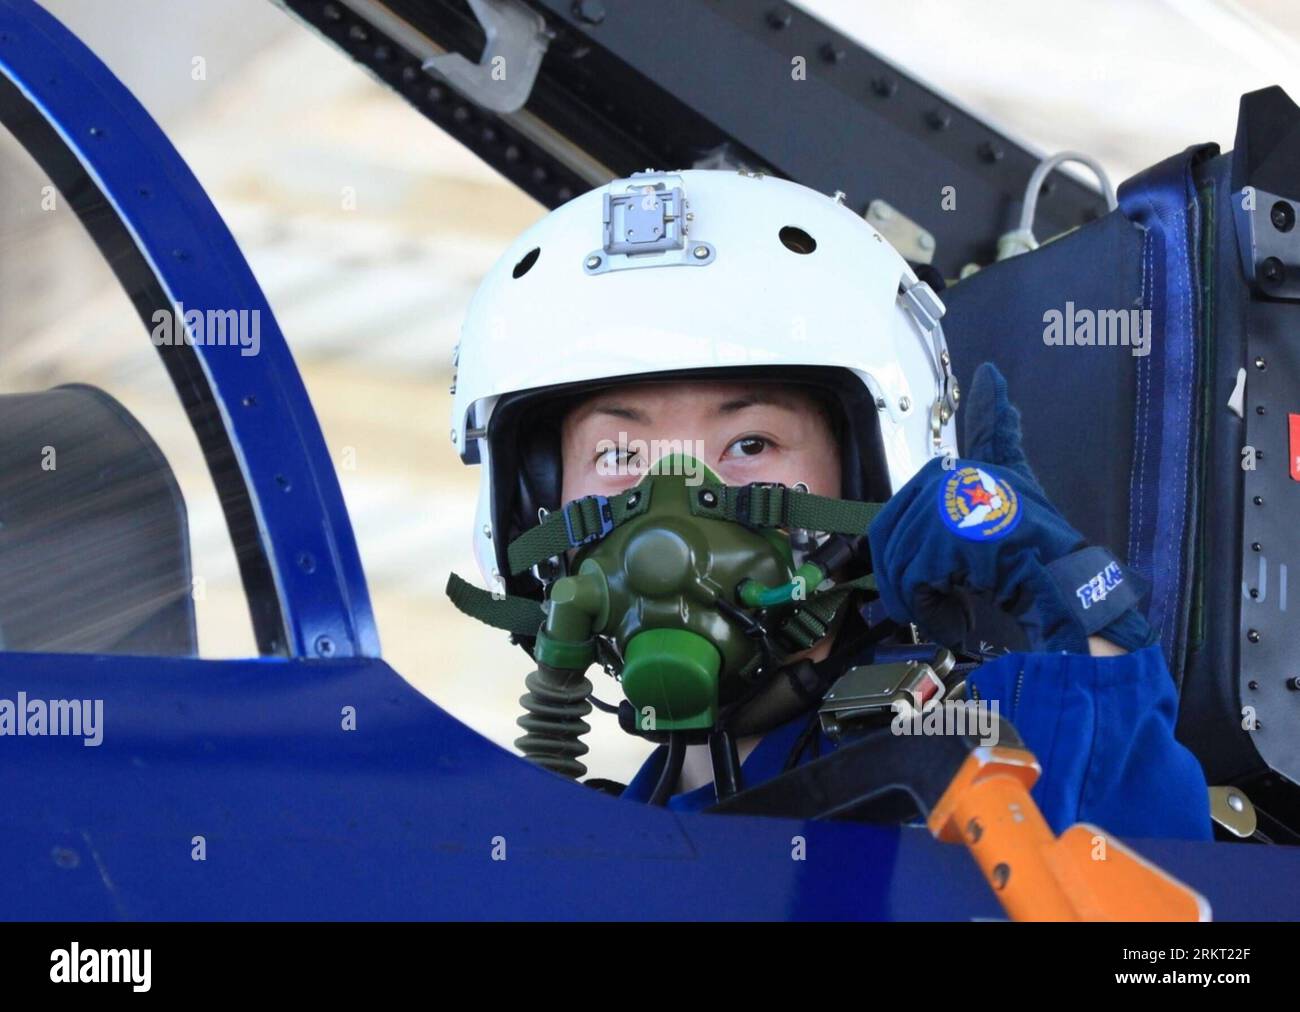 Bildnummer: 58352752  Datum: 15.08.2012  Copyright: imago/Xinhua (120815) -- BEIJING, Aug. 15, 2012 (Xinhua) -- A female fighter pilot of the Chinese People s Liberation Army (PLA) prepares to take off on July 29, 2012. Five female Air Force pilots Wednesday completed their first successful solo flights using the domestically manufactured J-10 fighter jet, the Air Force of the People s Liberation Army (PLA) said. (Xinhua/Yuan Xiaowei)(mcg) CHINA-FEMALE FIGHTER PILOTS-SOLO FLIGHT (CN) PUBLICATIONxNOTxINxCHN Gesellschaft Kultur Tradition ethnische Minderheit xbs x0x 2012 quer      58352752 Date Stock Photo